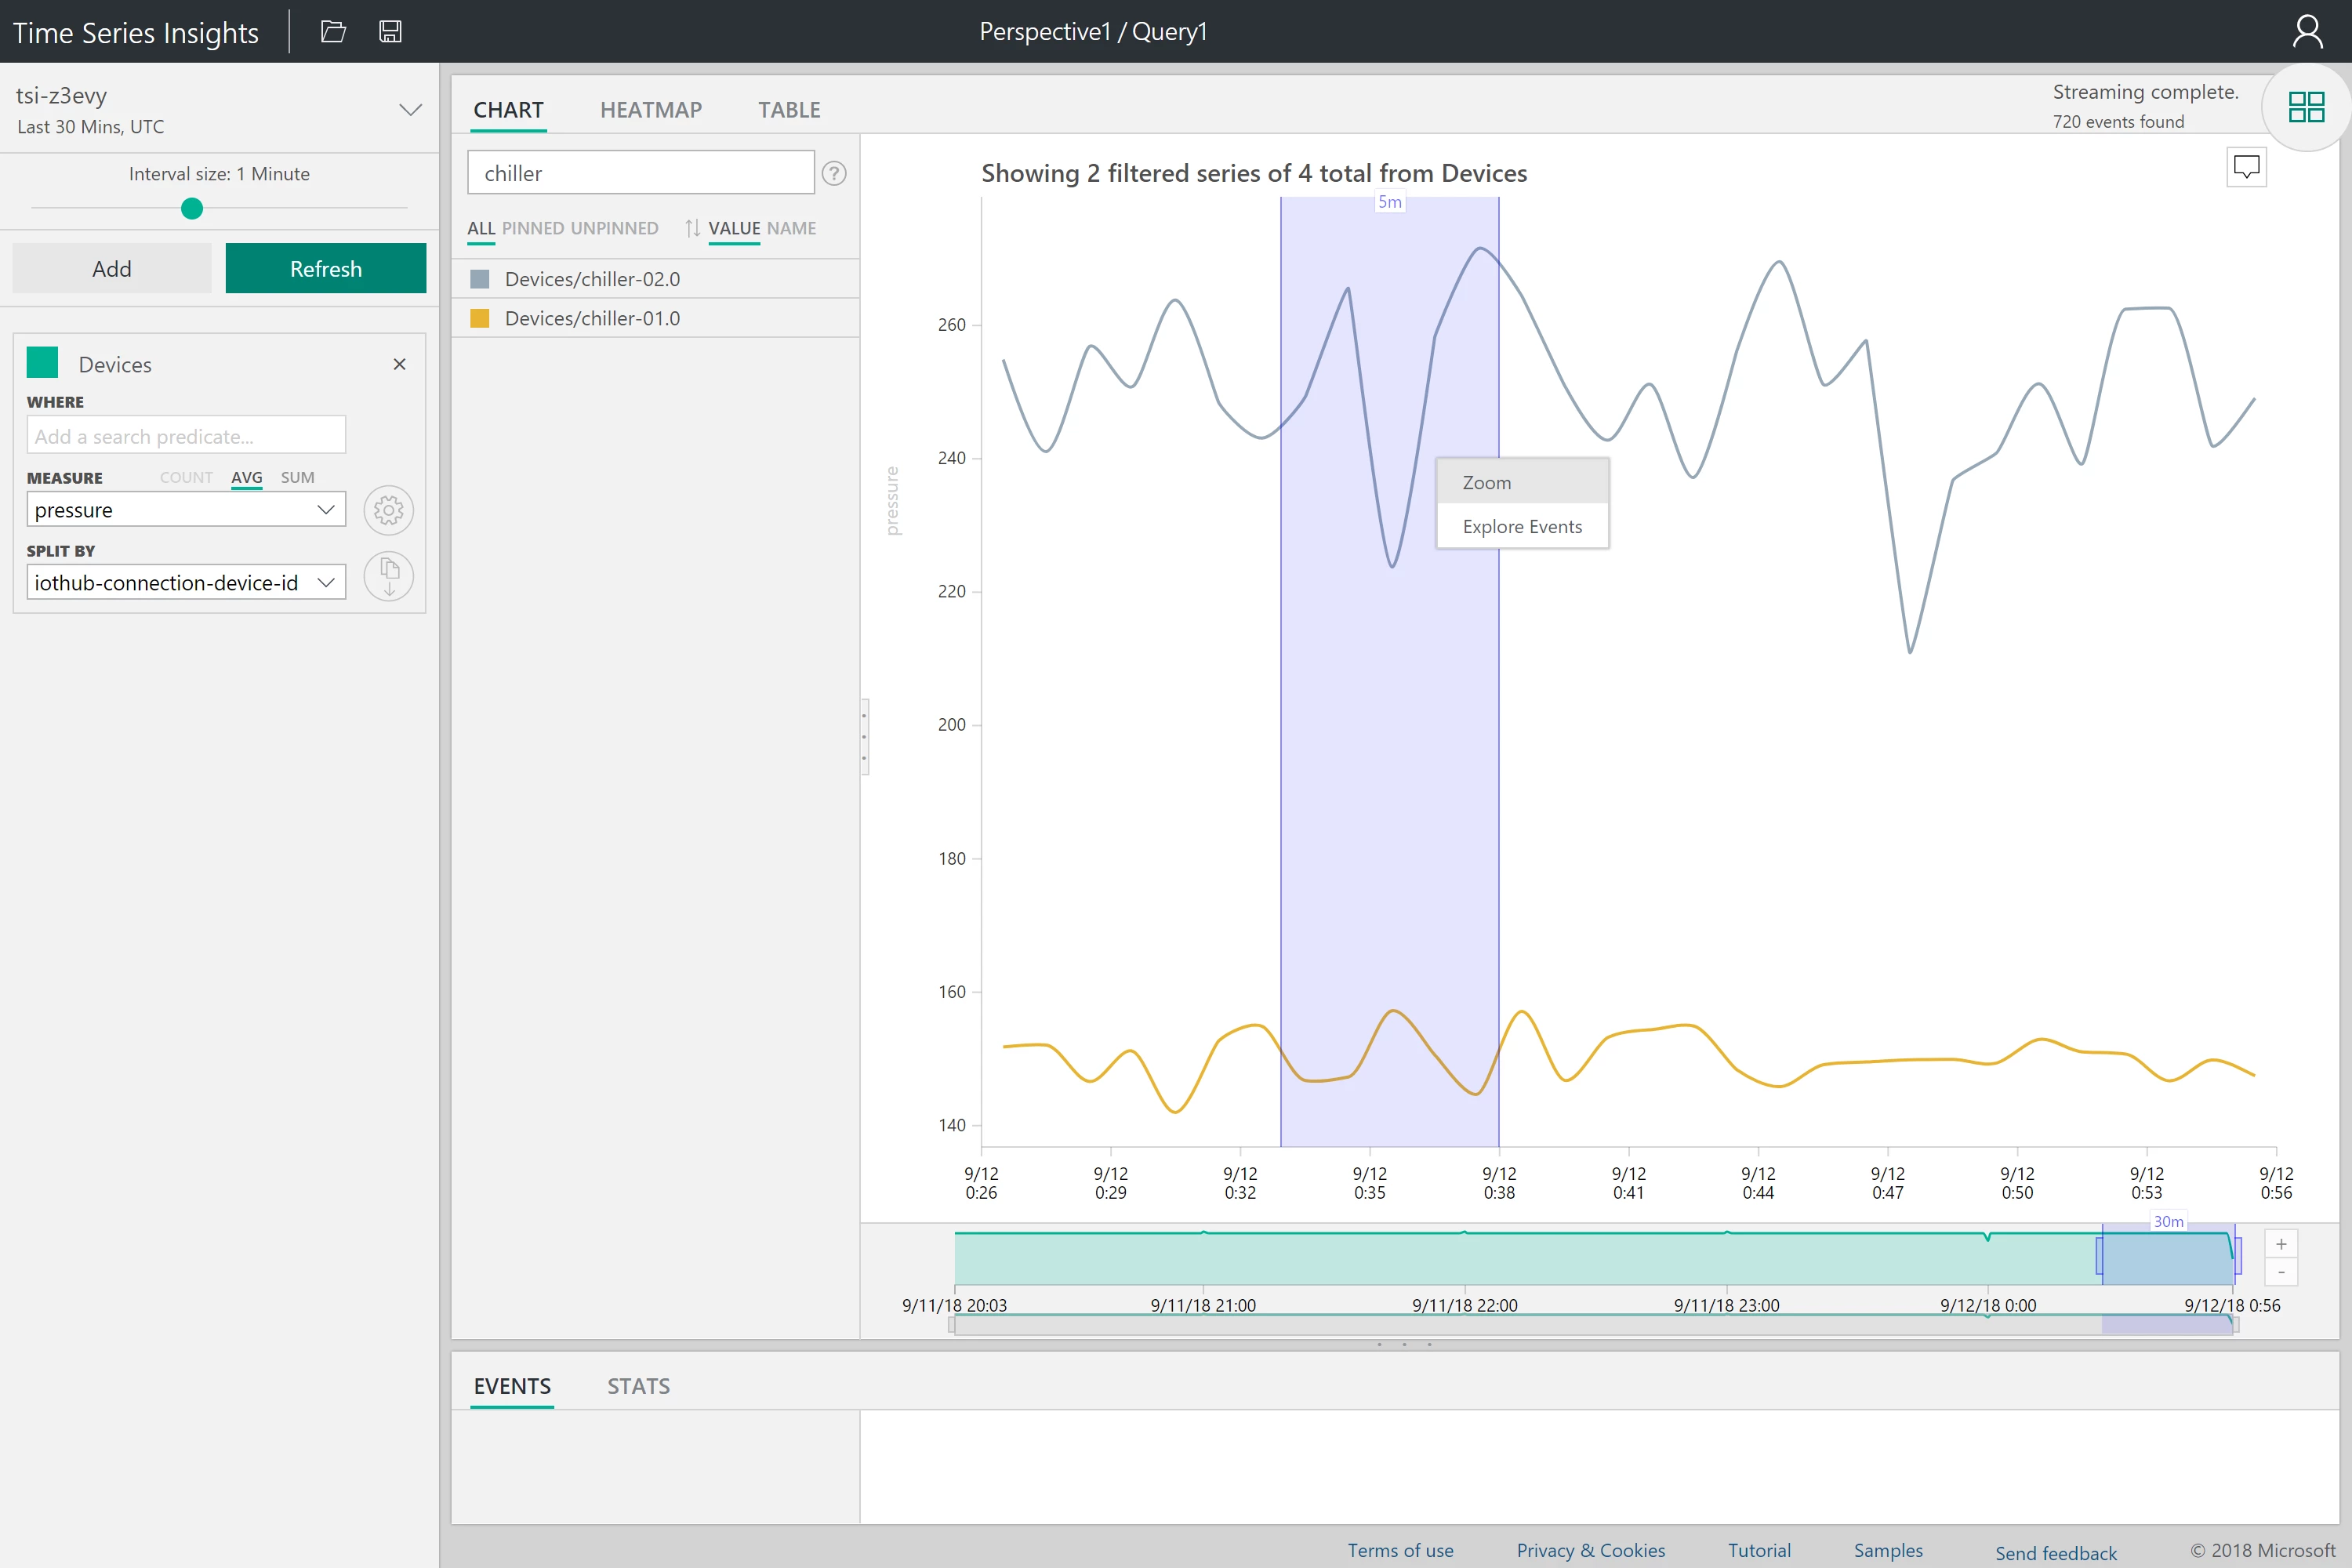 Screenshot of telemetry data in the Time Series Insights explorer